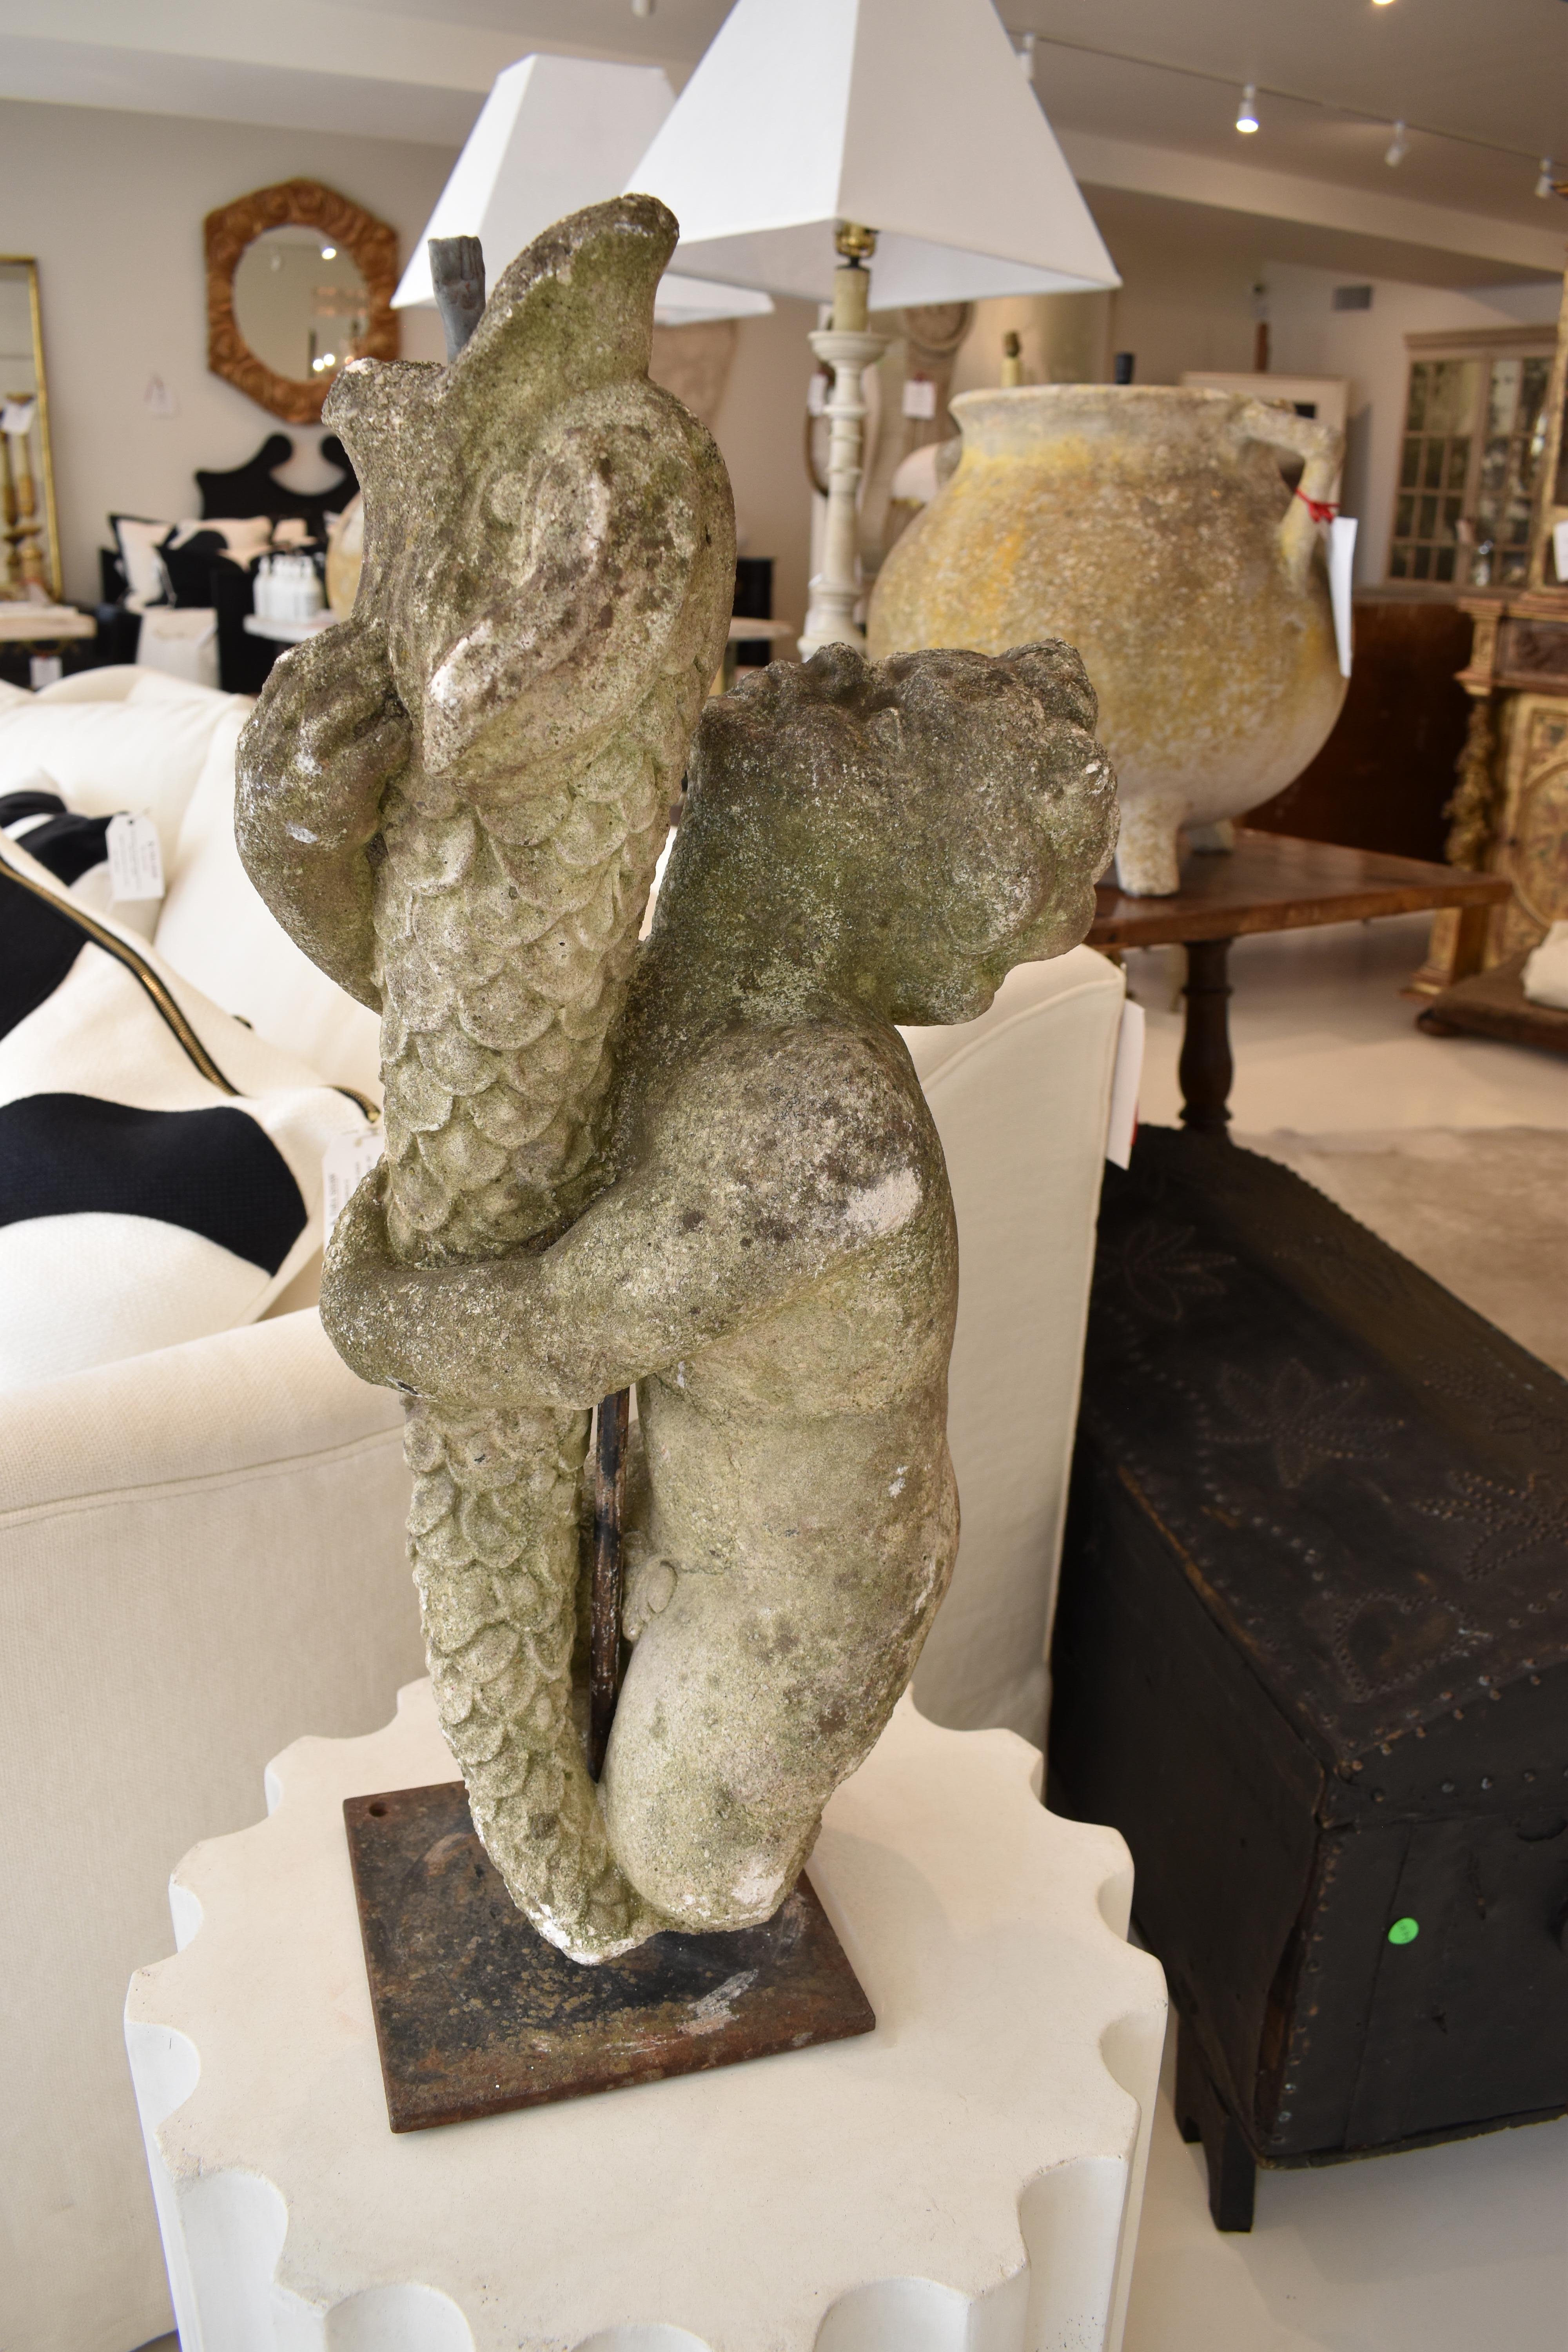 Possibly based on the old tale of the boy who caught a big fish, brought it home to keep as a pet, but returned it to the wild so it could be with his fish friends; this lovely statue would look great in your garden. It features a cherub or young